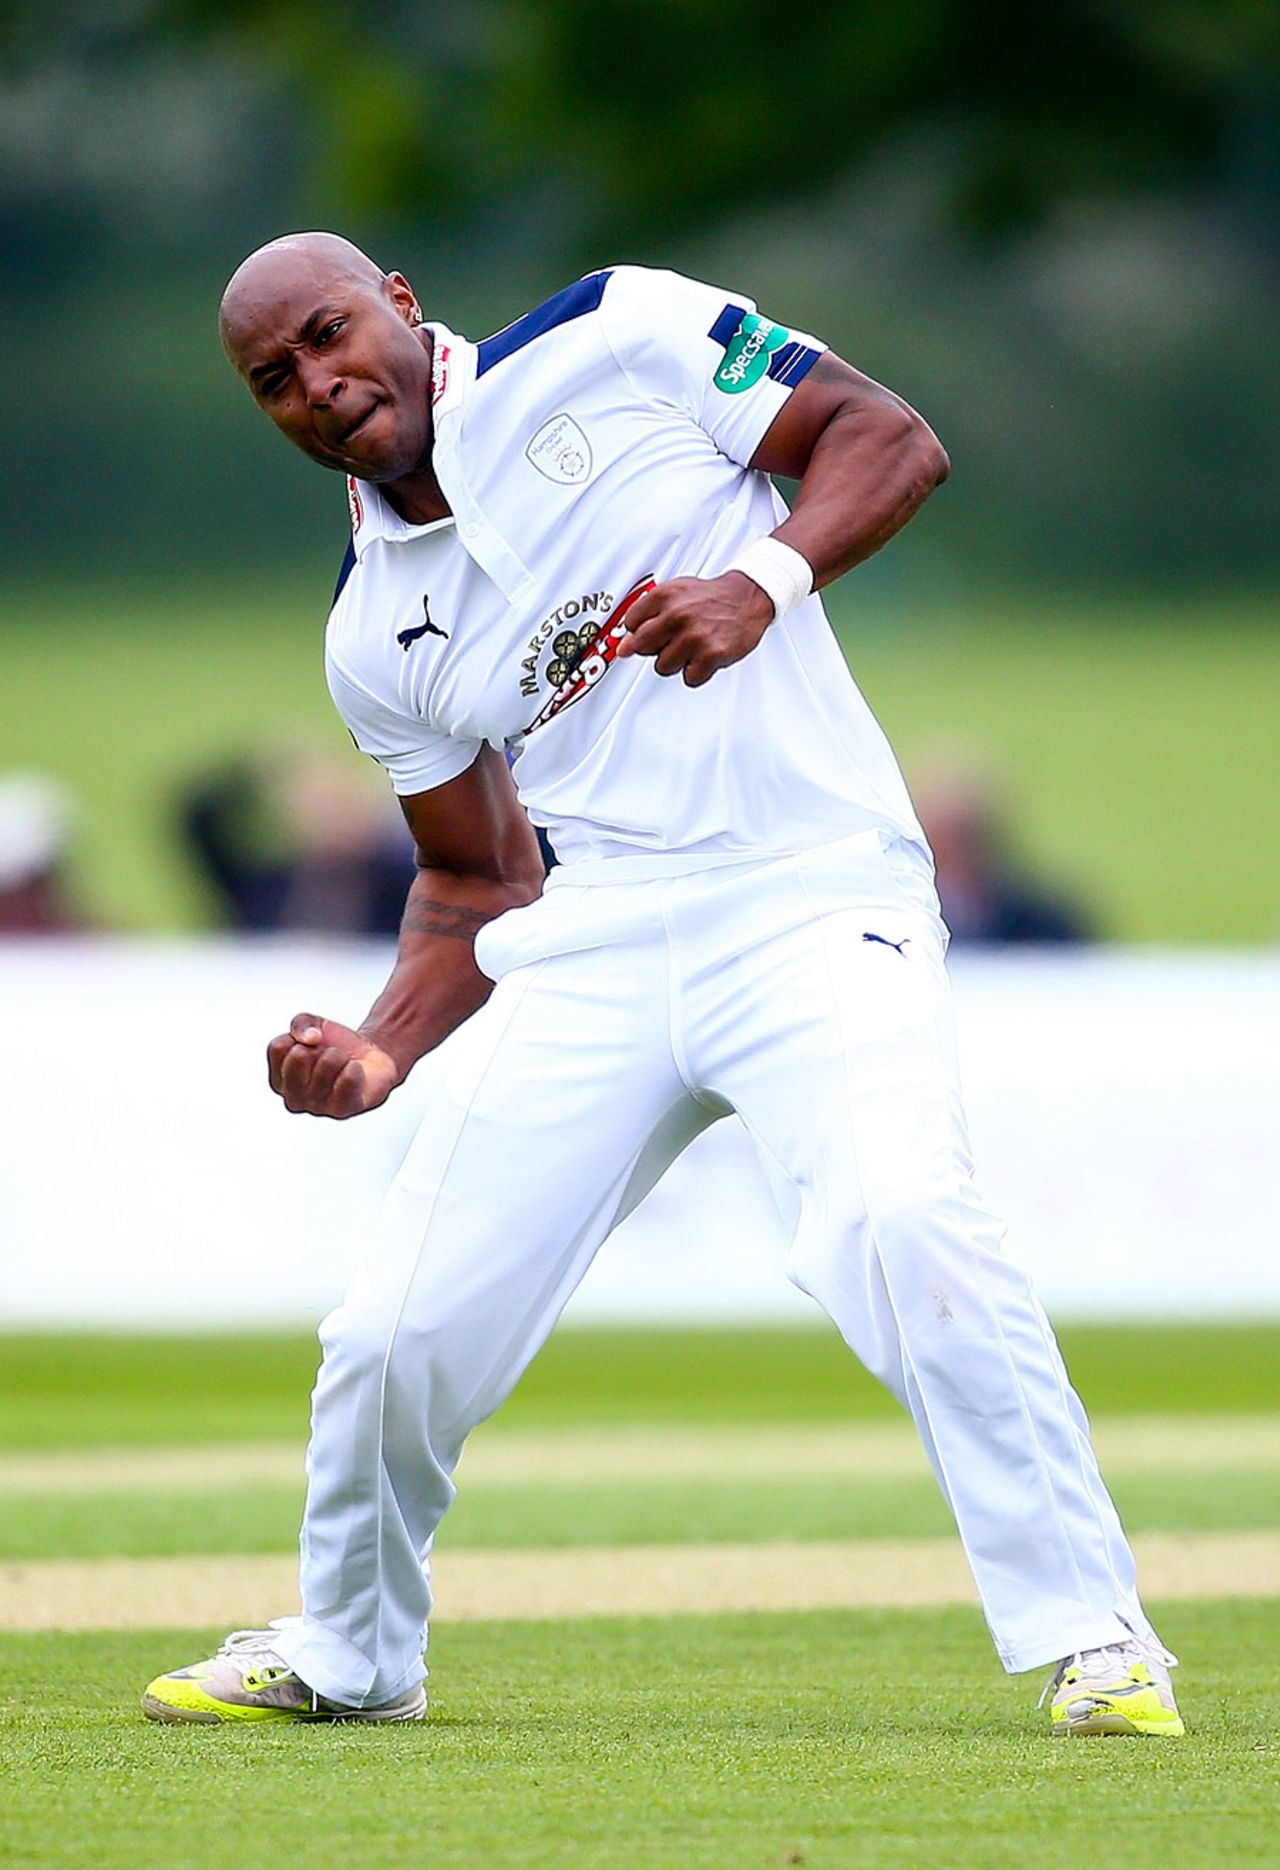 Tino Best celebrates his early dismissal of Sam Robson, Middlesex v Hampshire, County Championship, Division One, Merchant Taylors' School, 1st day, May 29, 2016